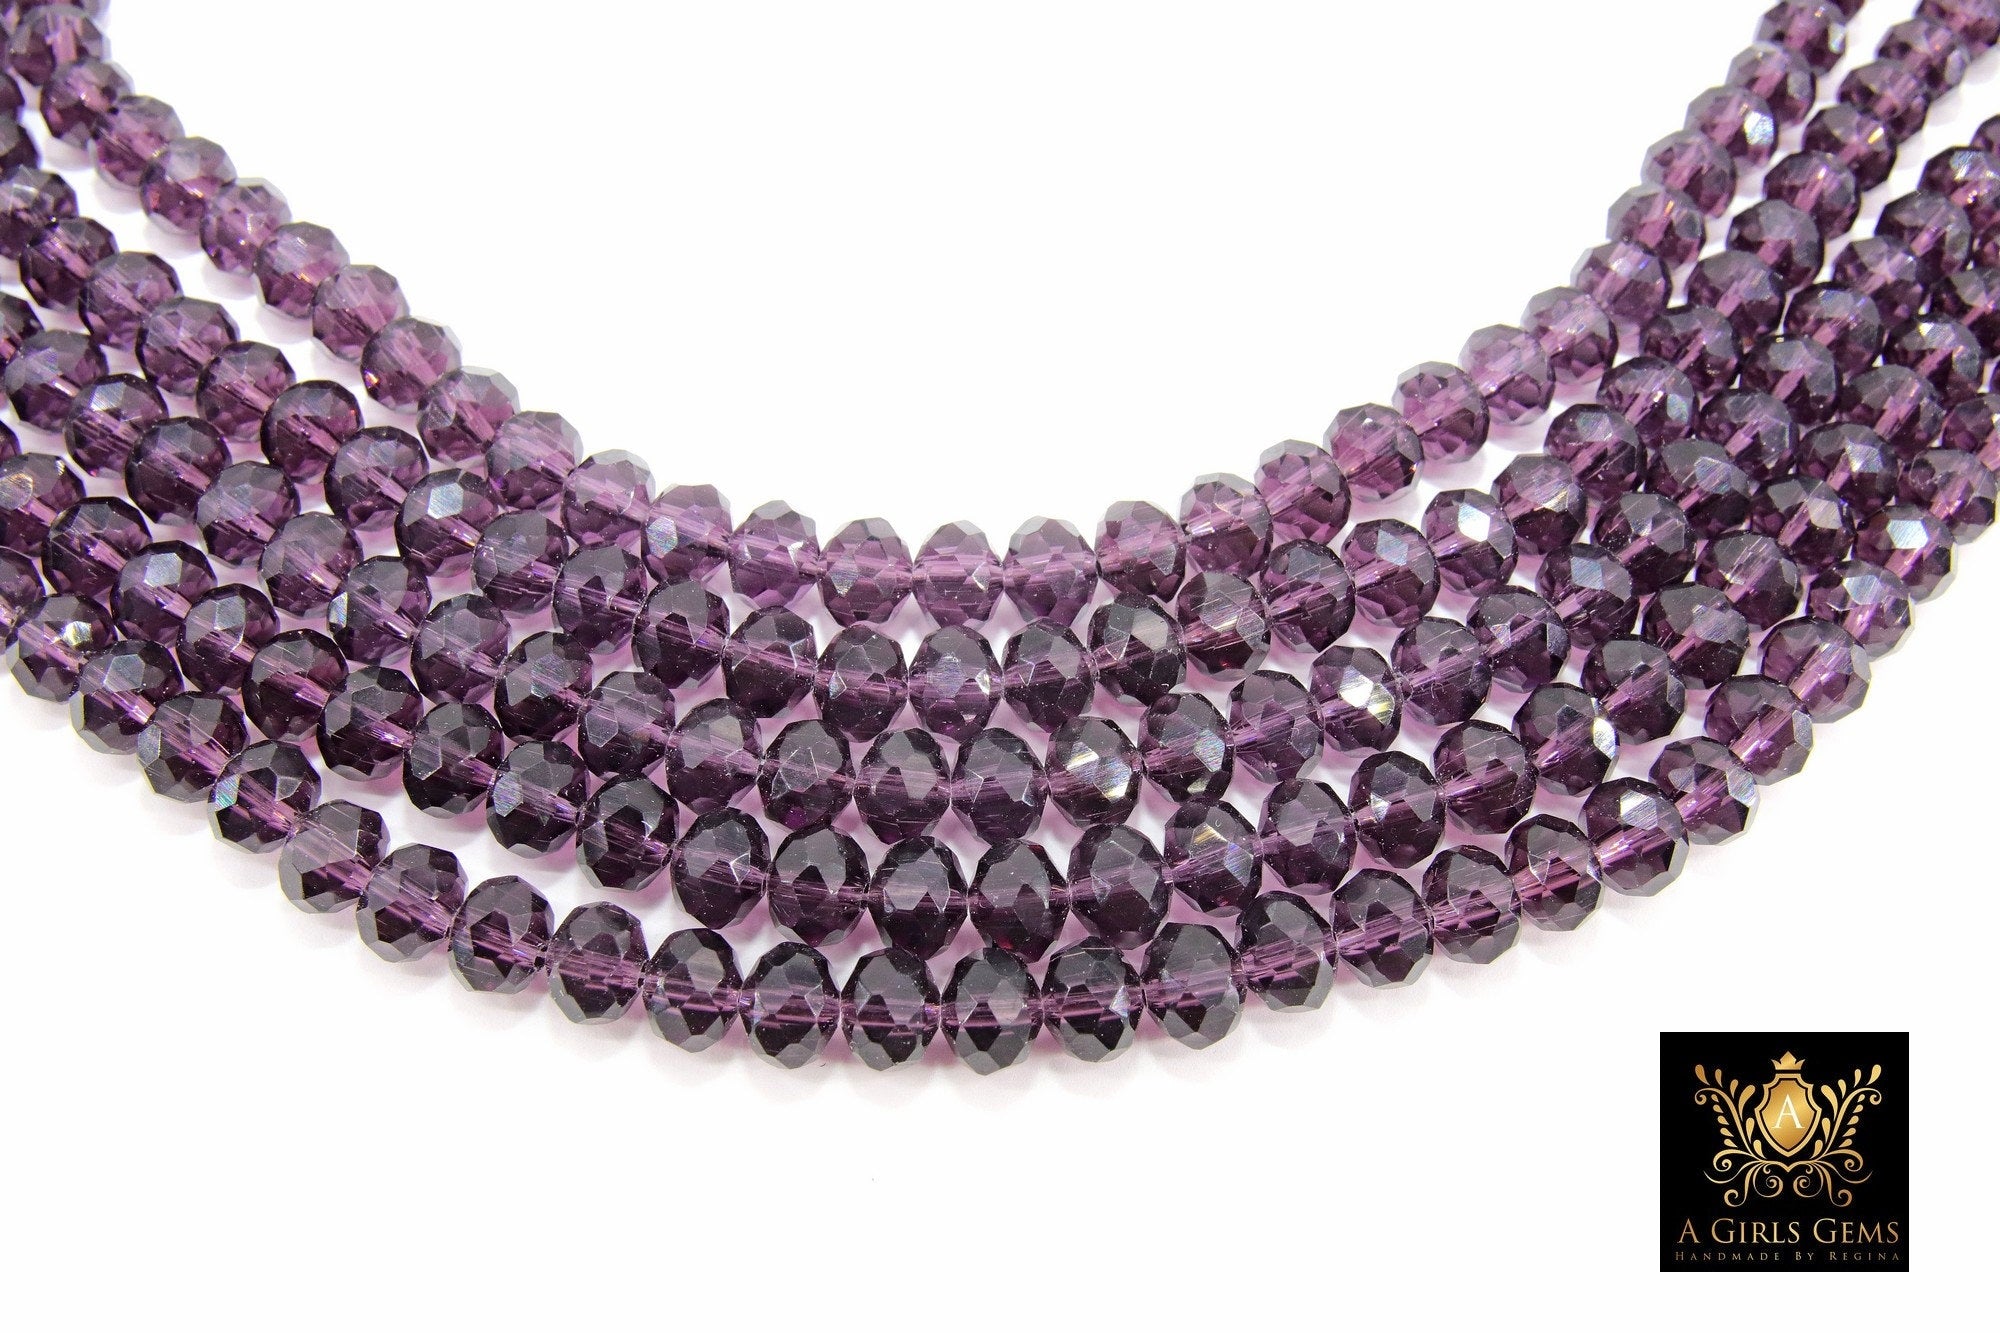 Purple Crystal Beads, Shimmery Faceted AB Crystal Rondelle Beads BS #178, sizes 8 x 6 mm, 16 inch Strands